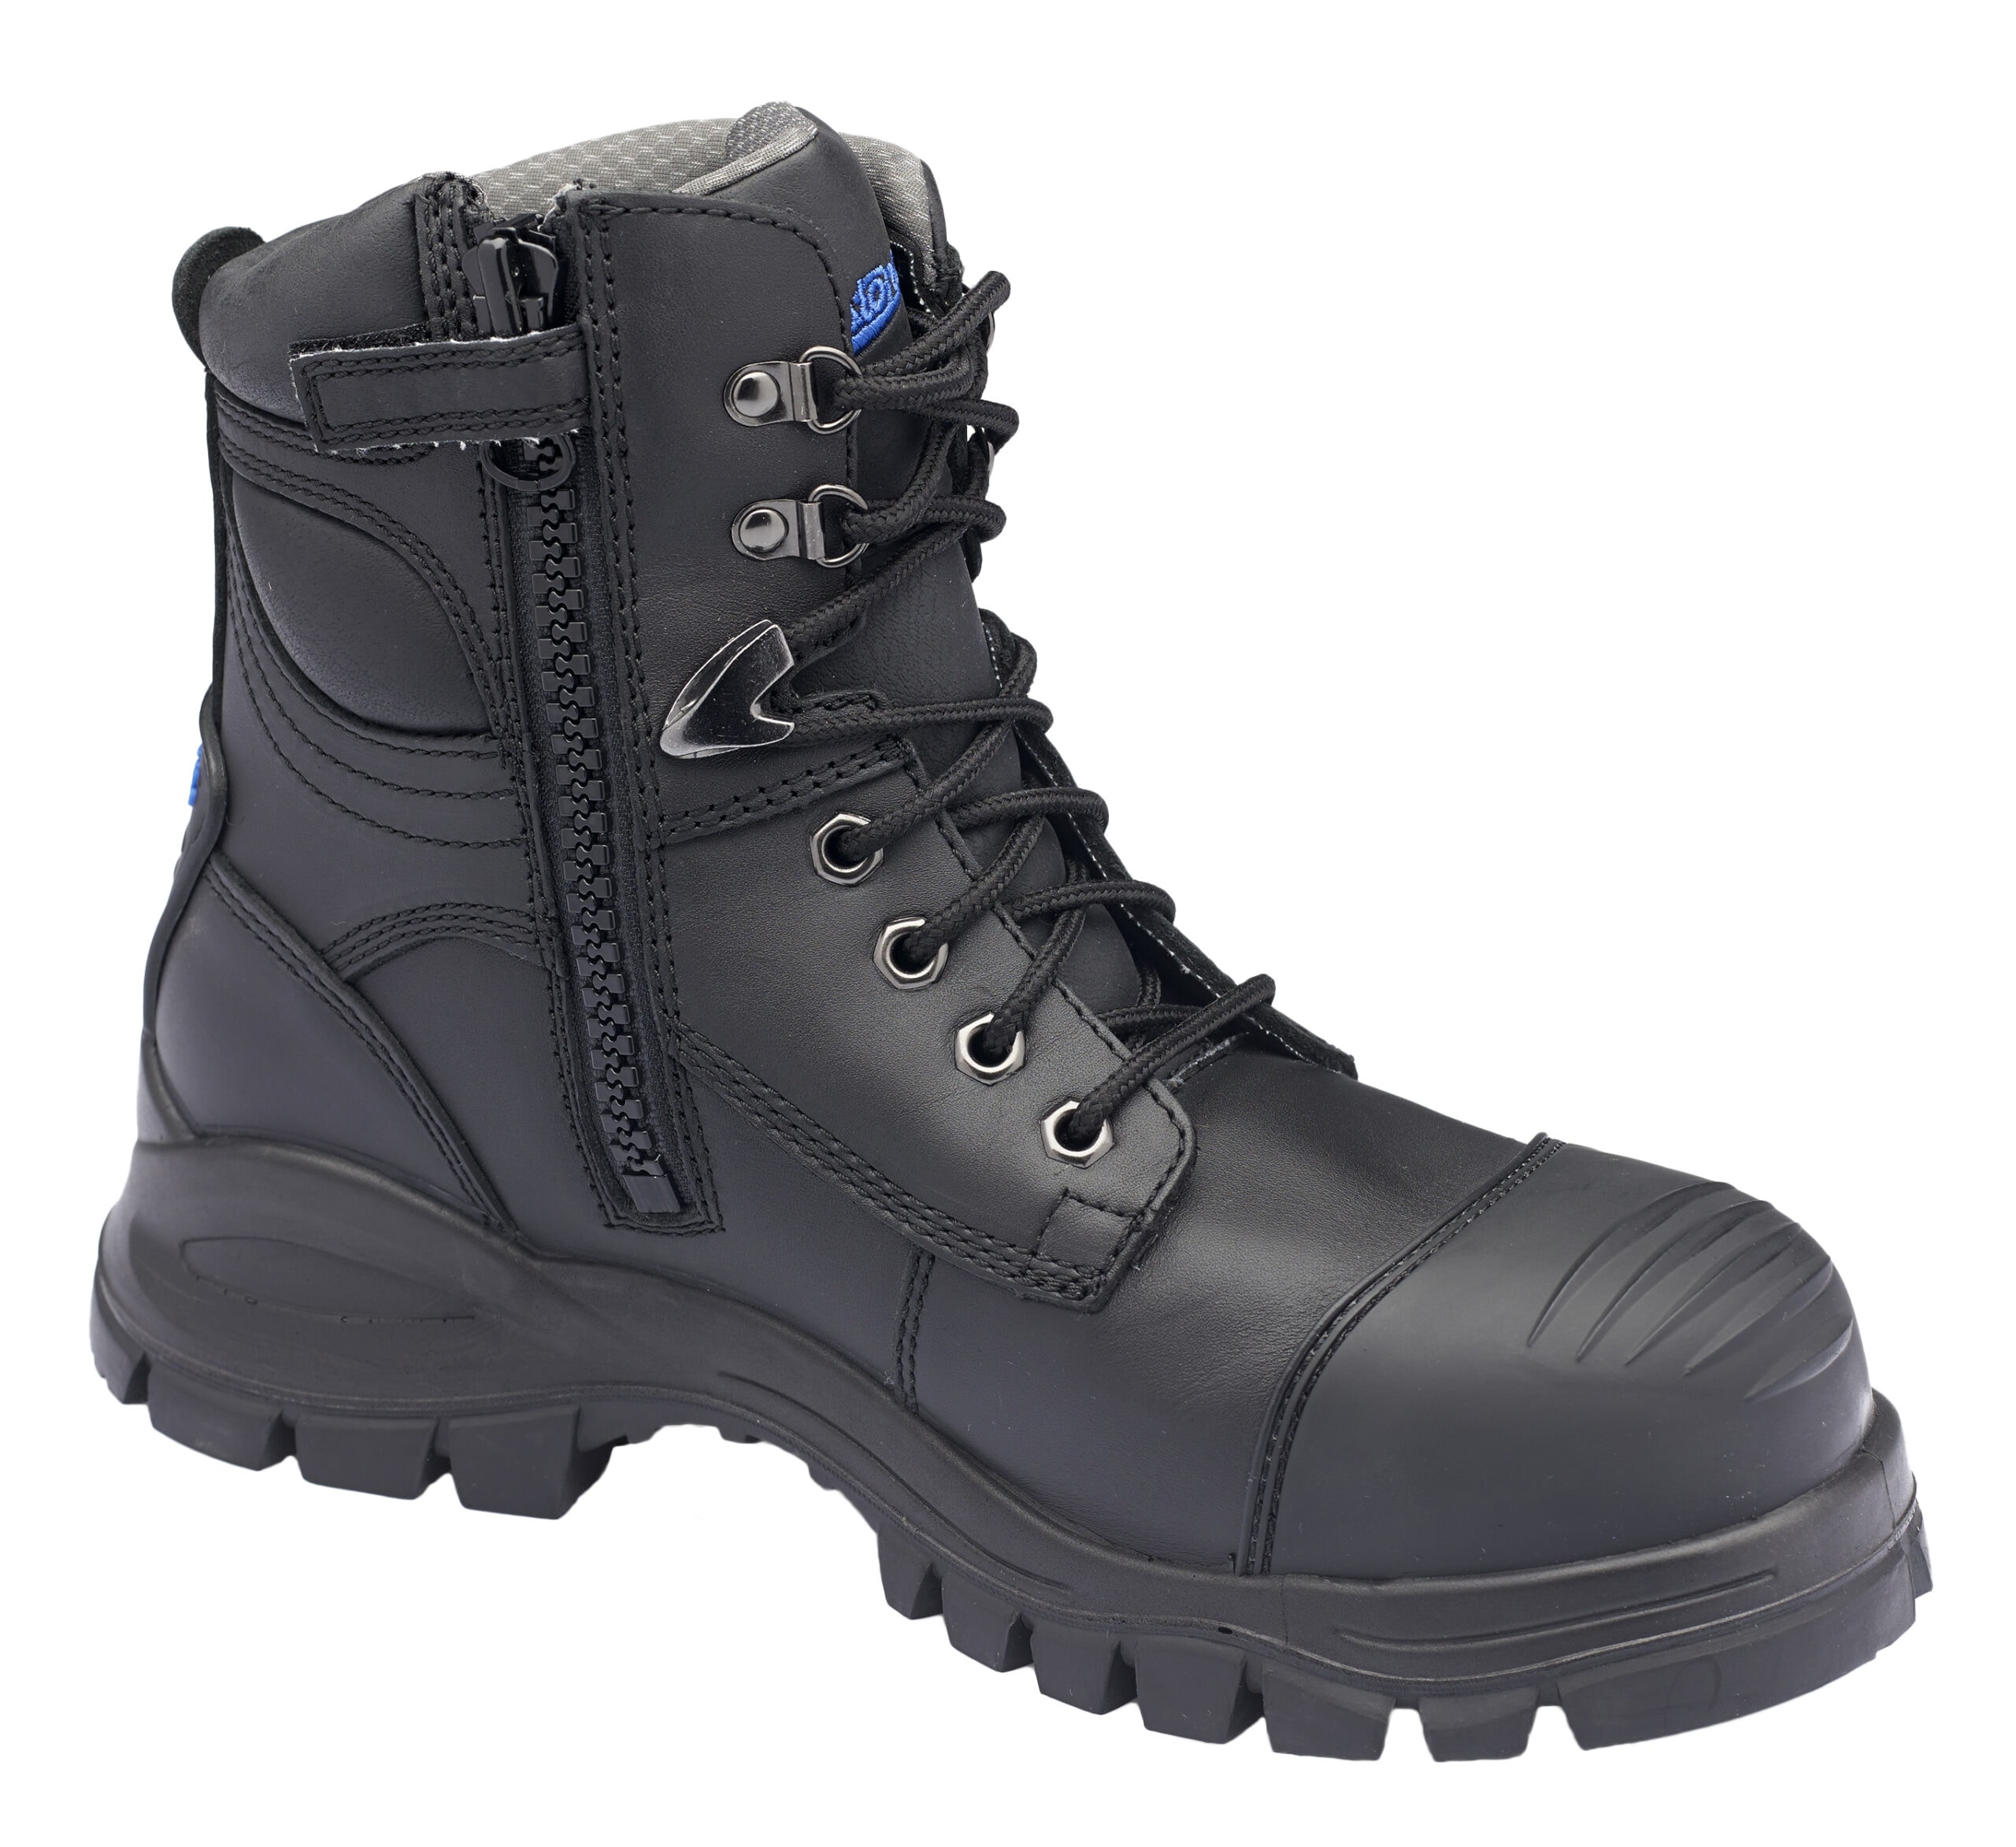 Blundstone 997 Lace/Zip-Up Safety Boots with Scuff Cap | At-Call Safety